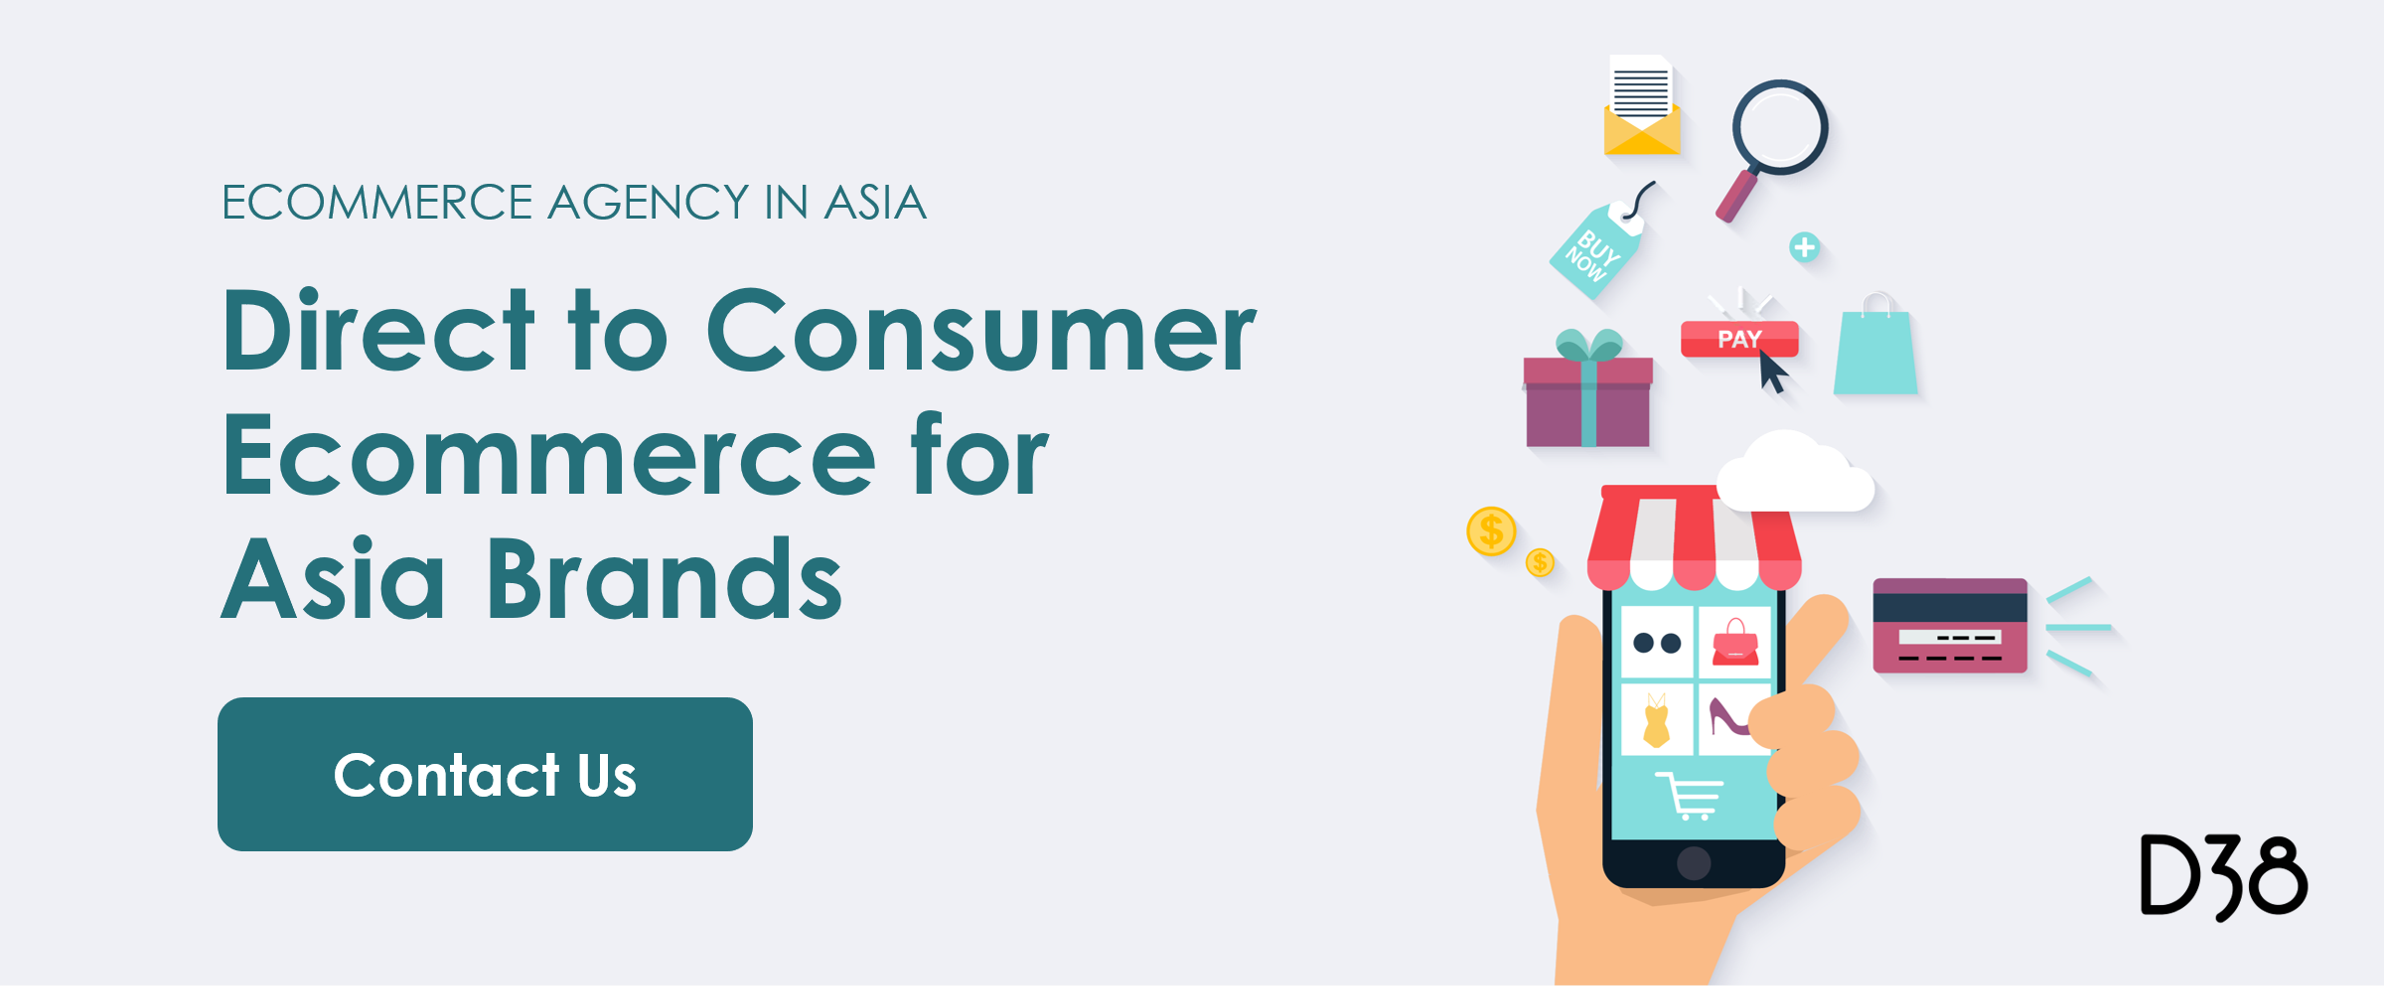 D38 Direct to Consumer Ecommerce Agency in Asia